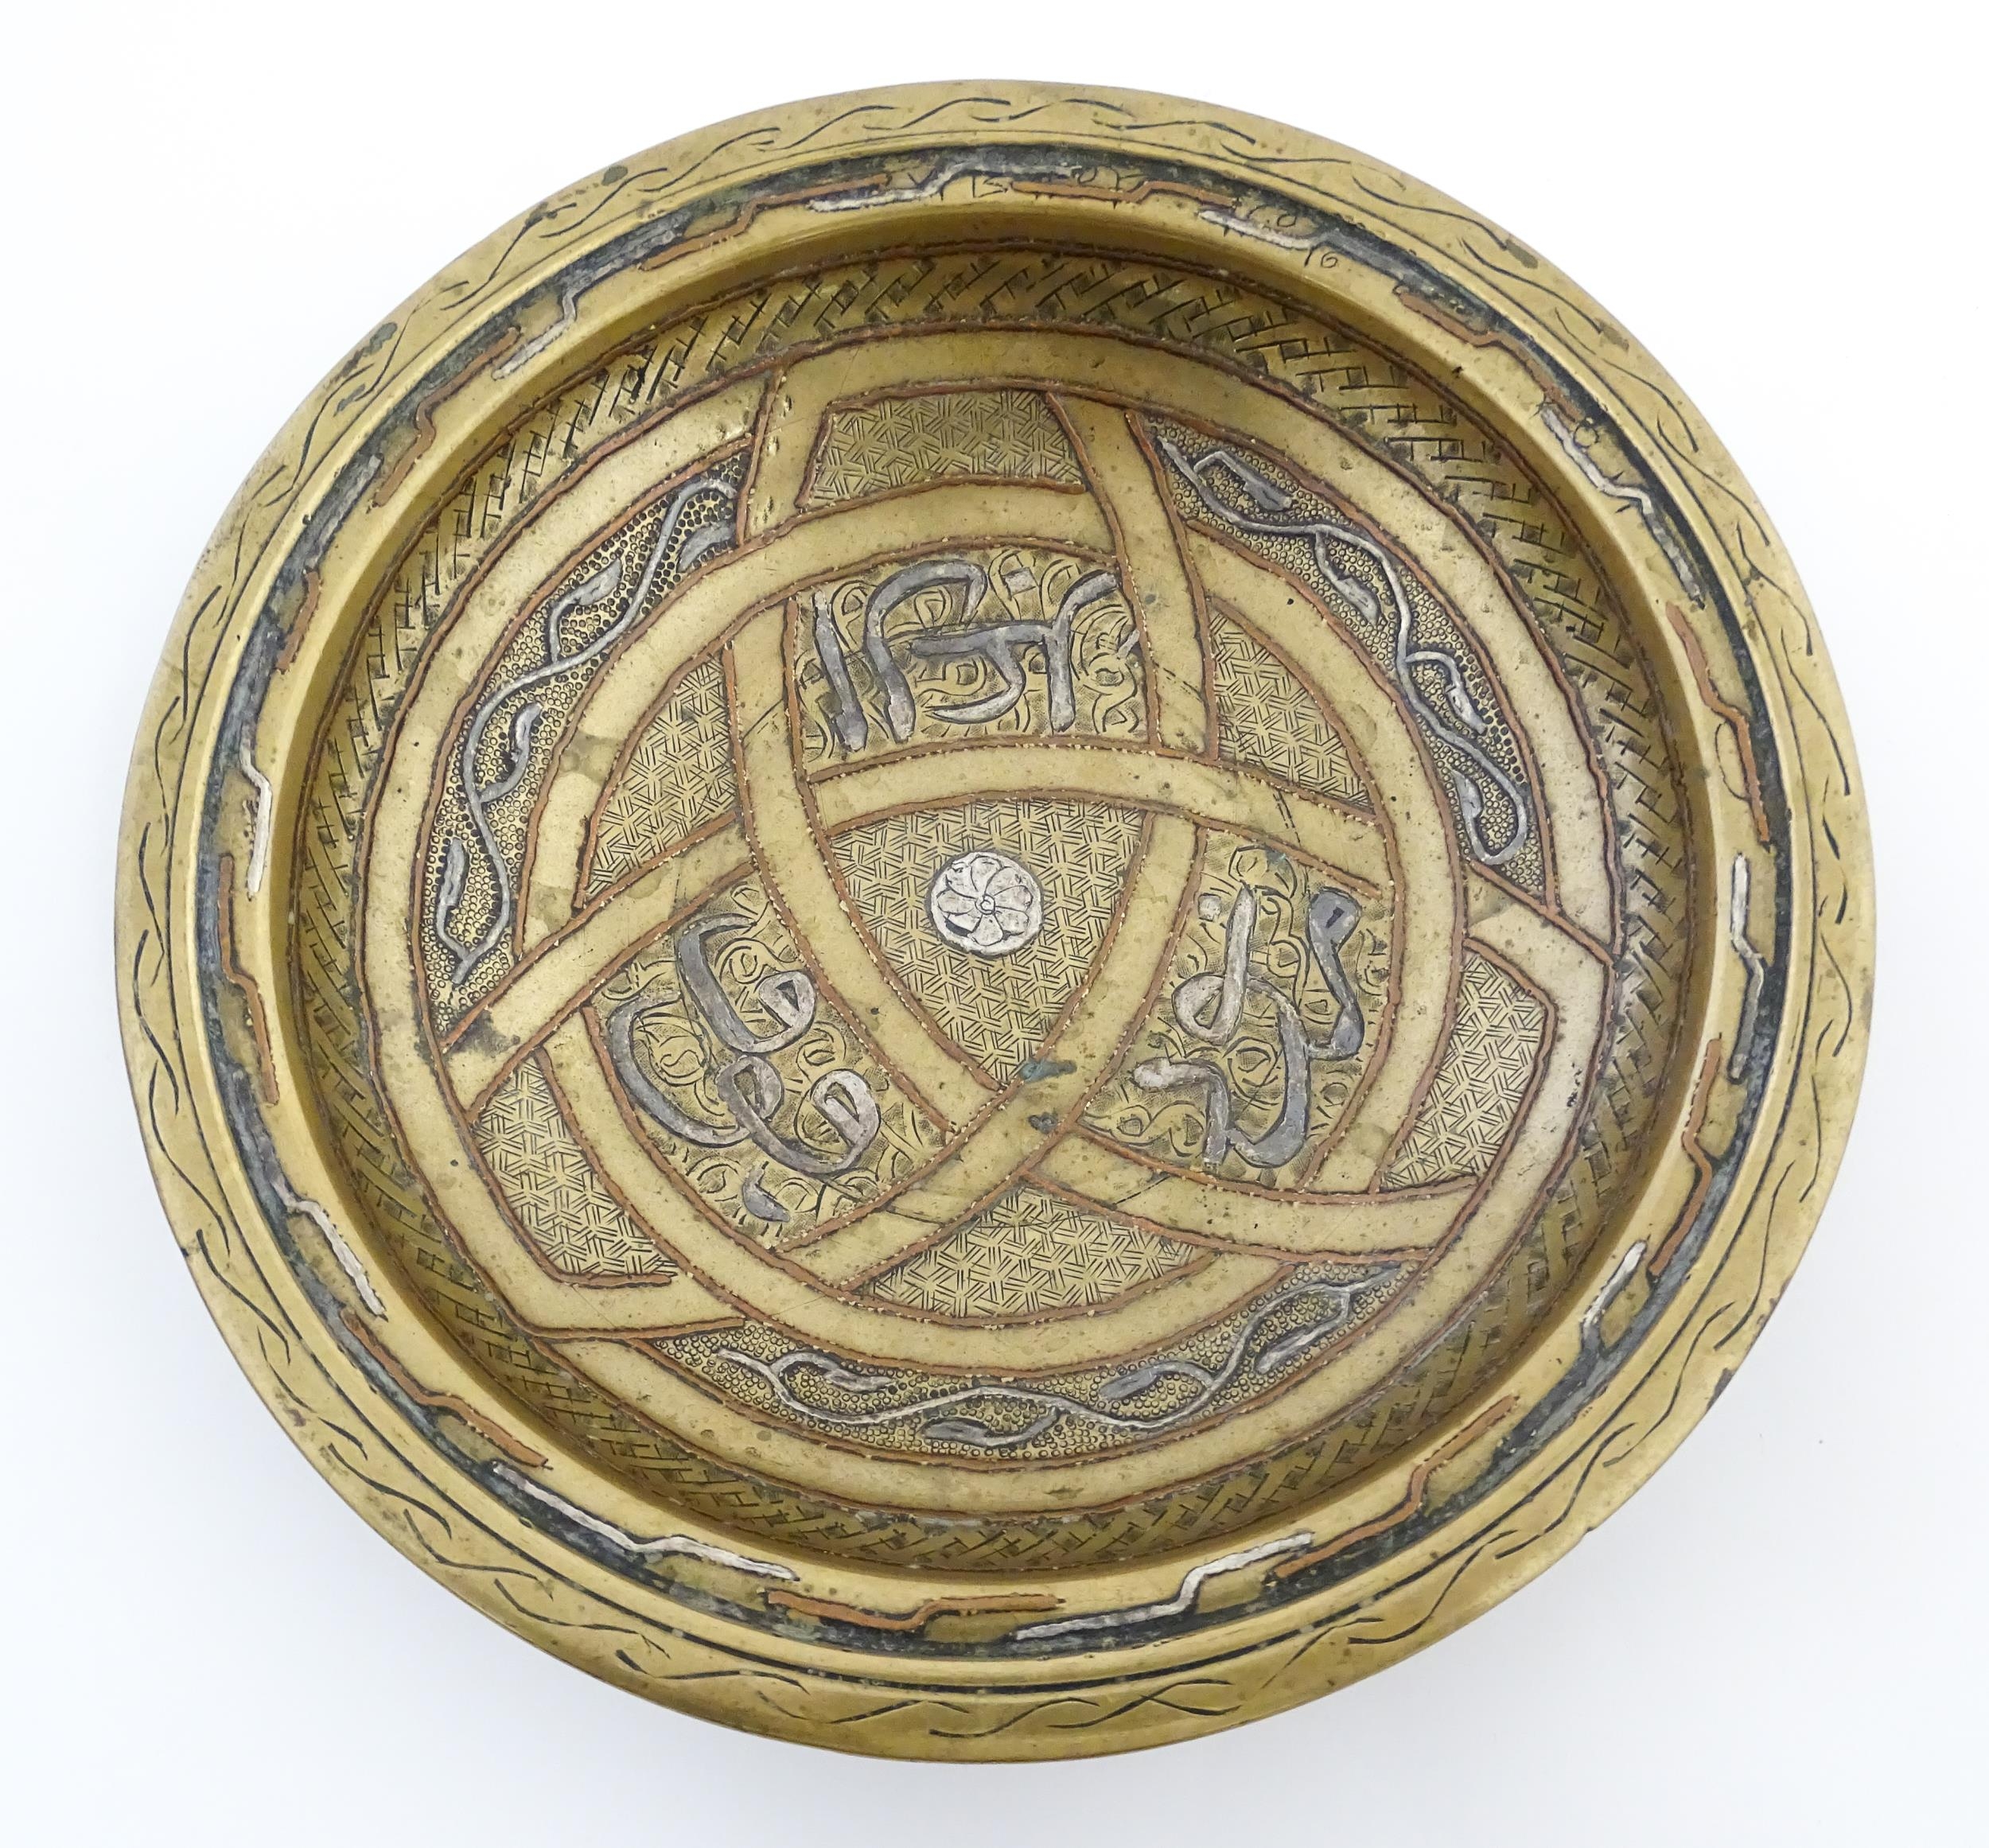 A Middle Eastern brass dish / bowl with incised detail and inlaid white metal and copper - Image 7 of 8